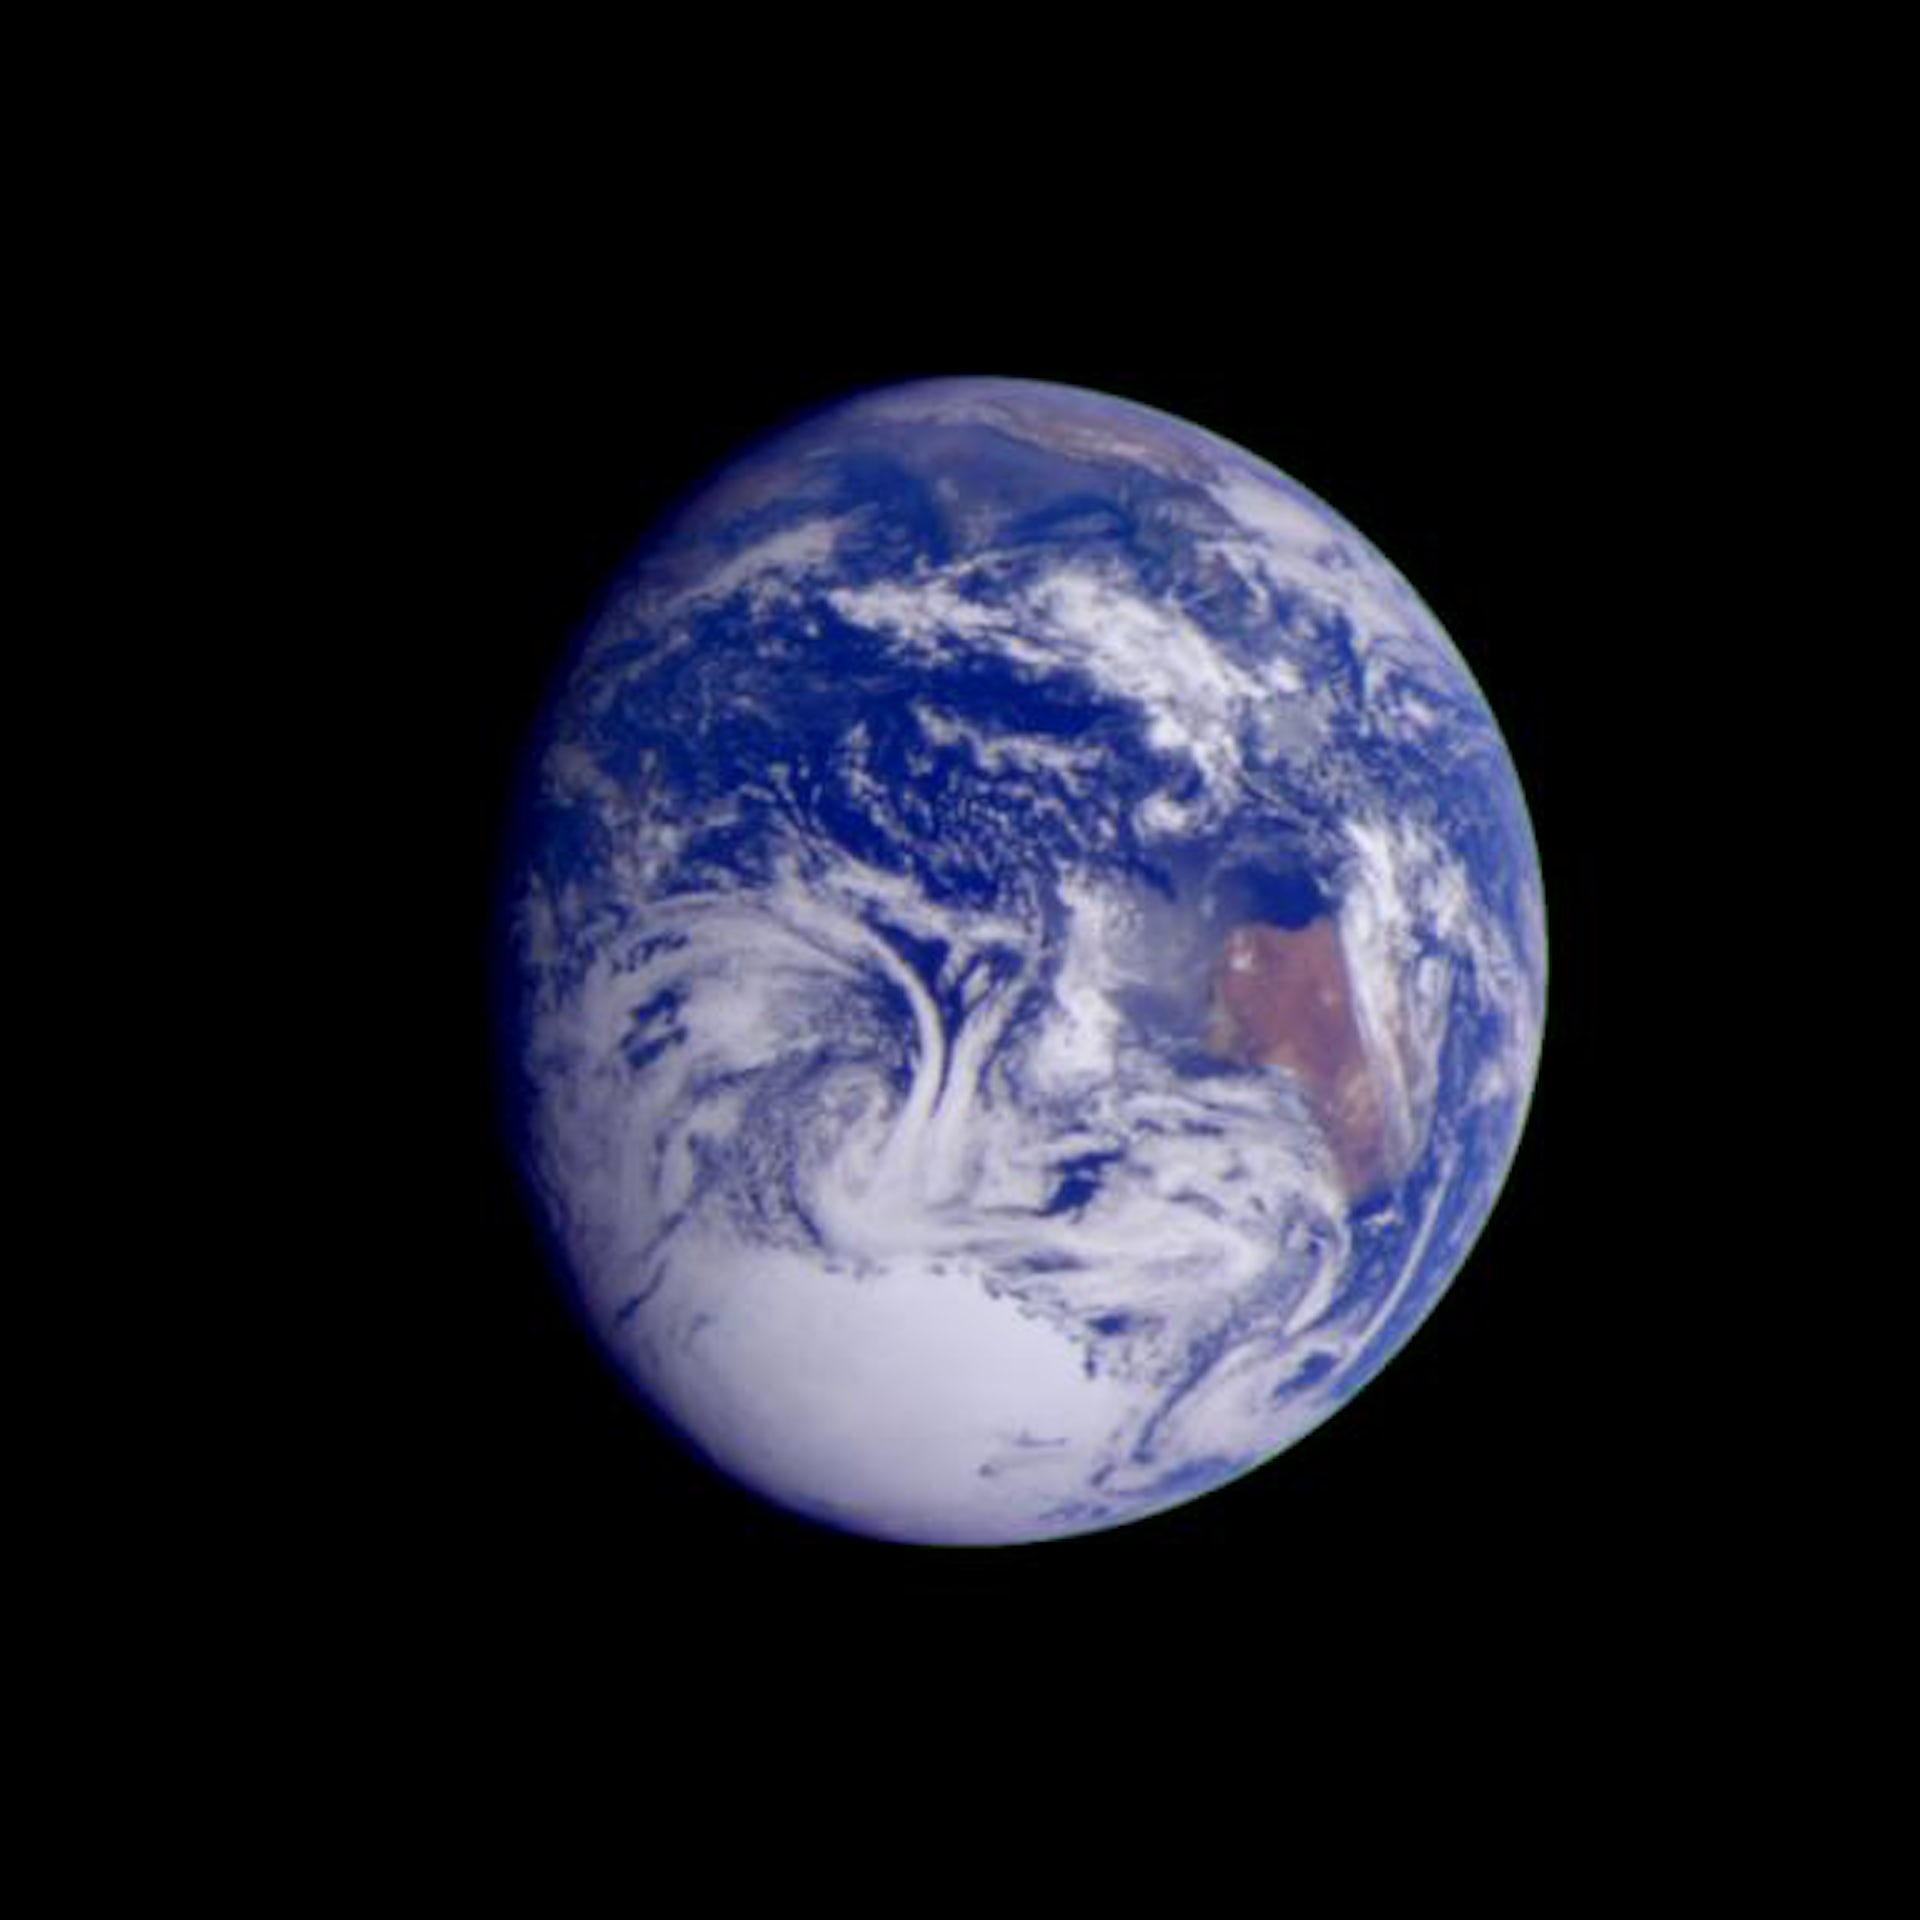 Image taken by the Galileo spacecraft at a distance of 2.4 million km.